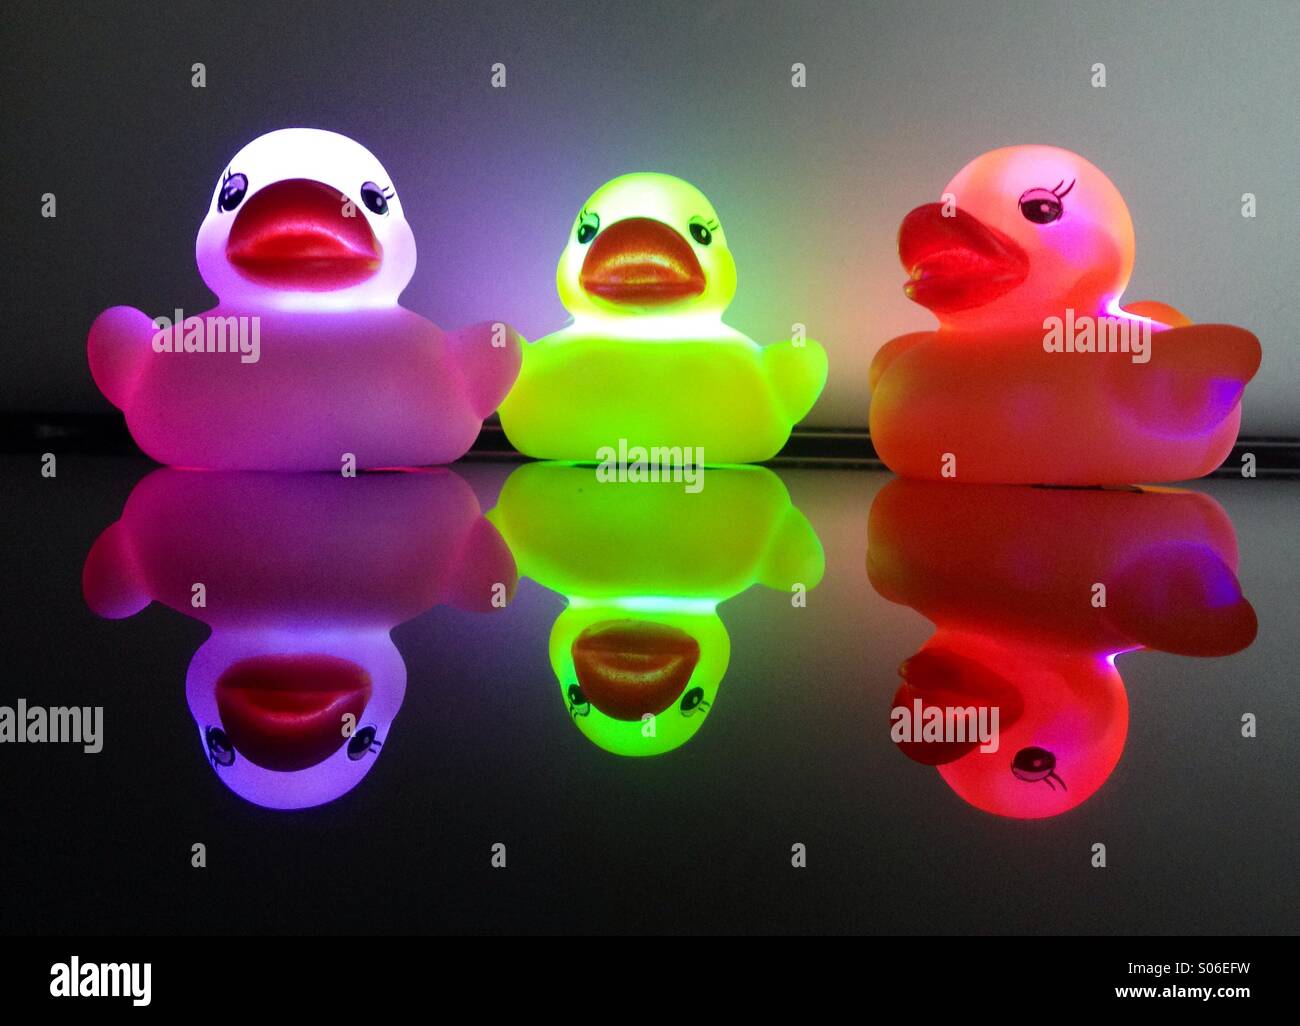 Glowing colorful rubber ducks on a shiny surface. Stock Photo